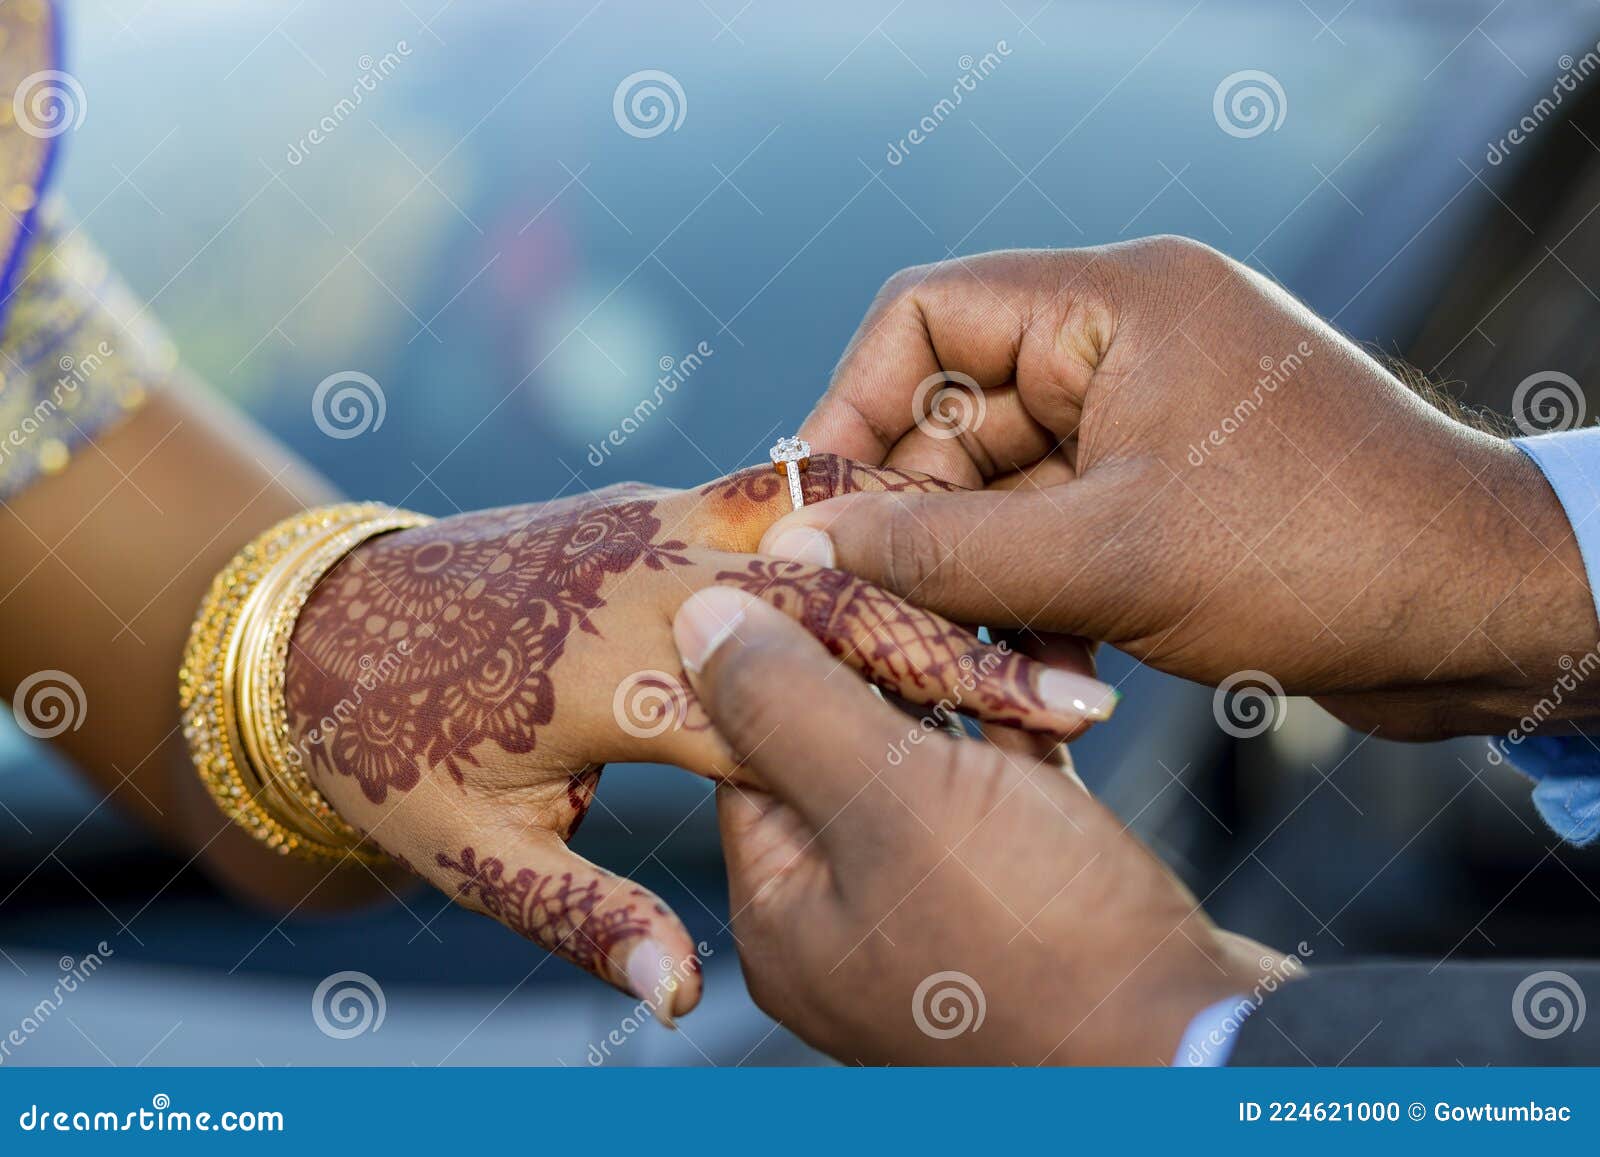 Wedding Hands Ring Stock Vector Illustration and Royalty Free Wedding Hands  Ring Clipart